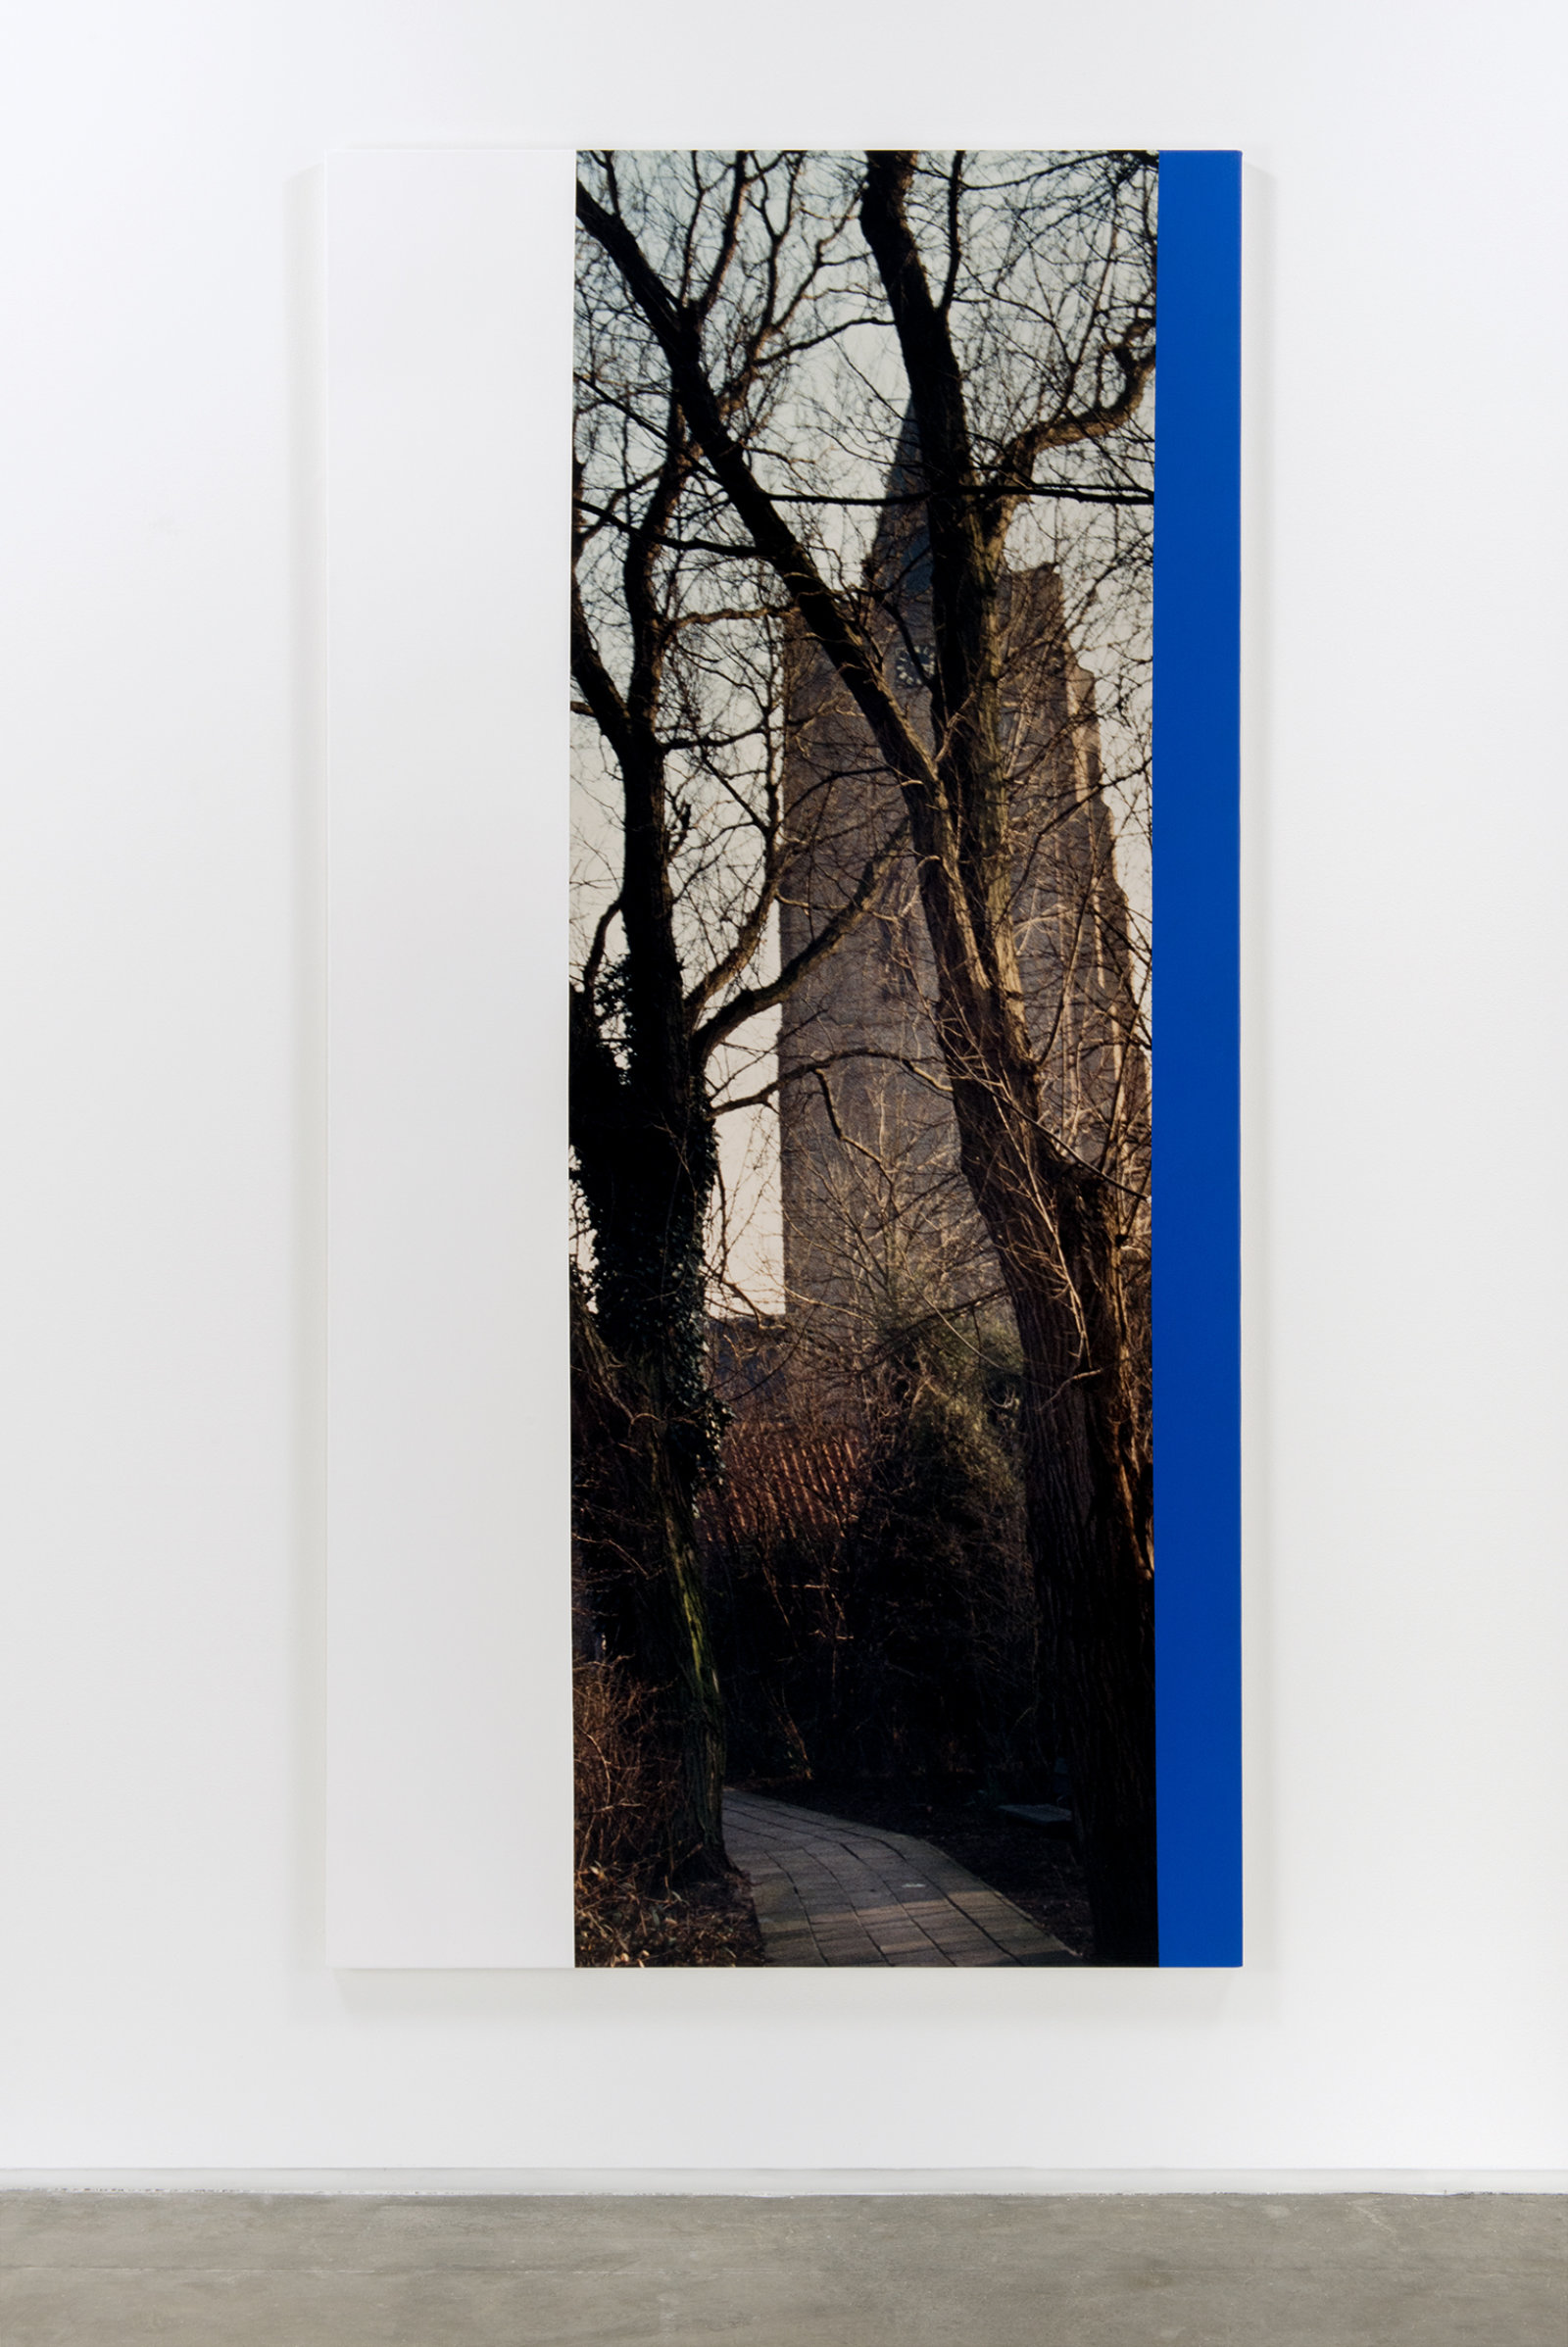 Ian Wallace, Hommage a Mondrian IV (Tower and Trees Middleburg), 1990, photolaminate and acrylic on canvas, 96 x 48 in. (244 x 122 cm)